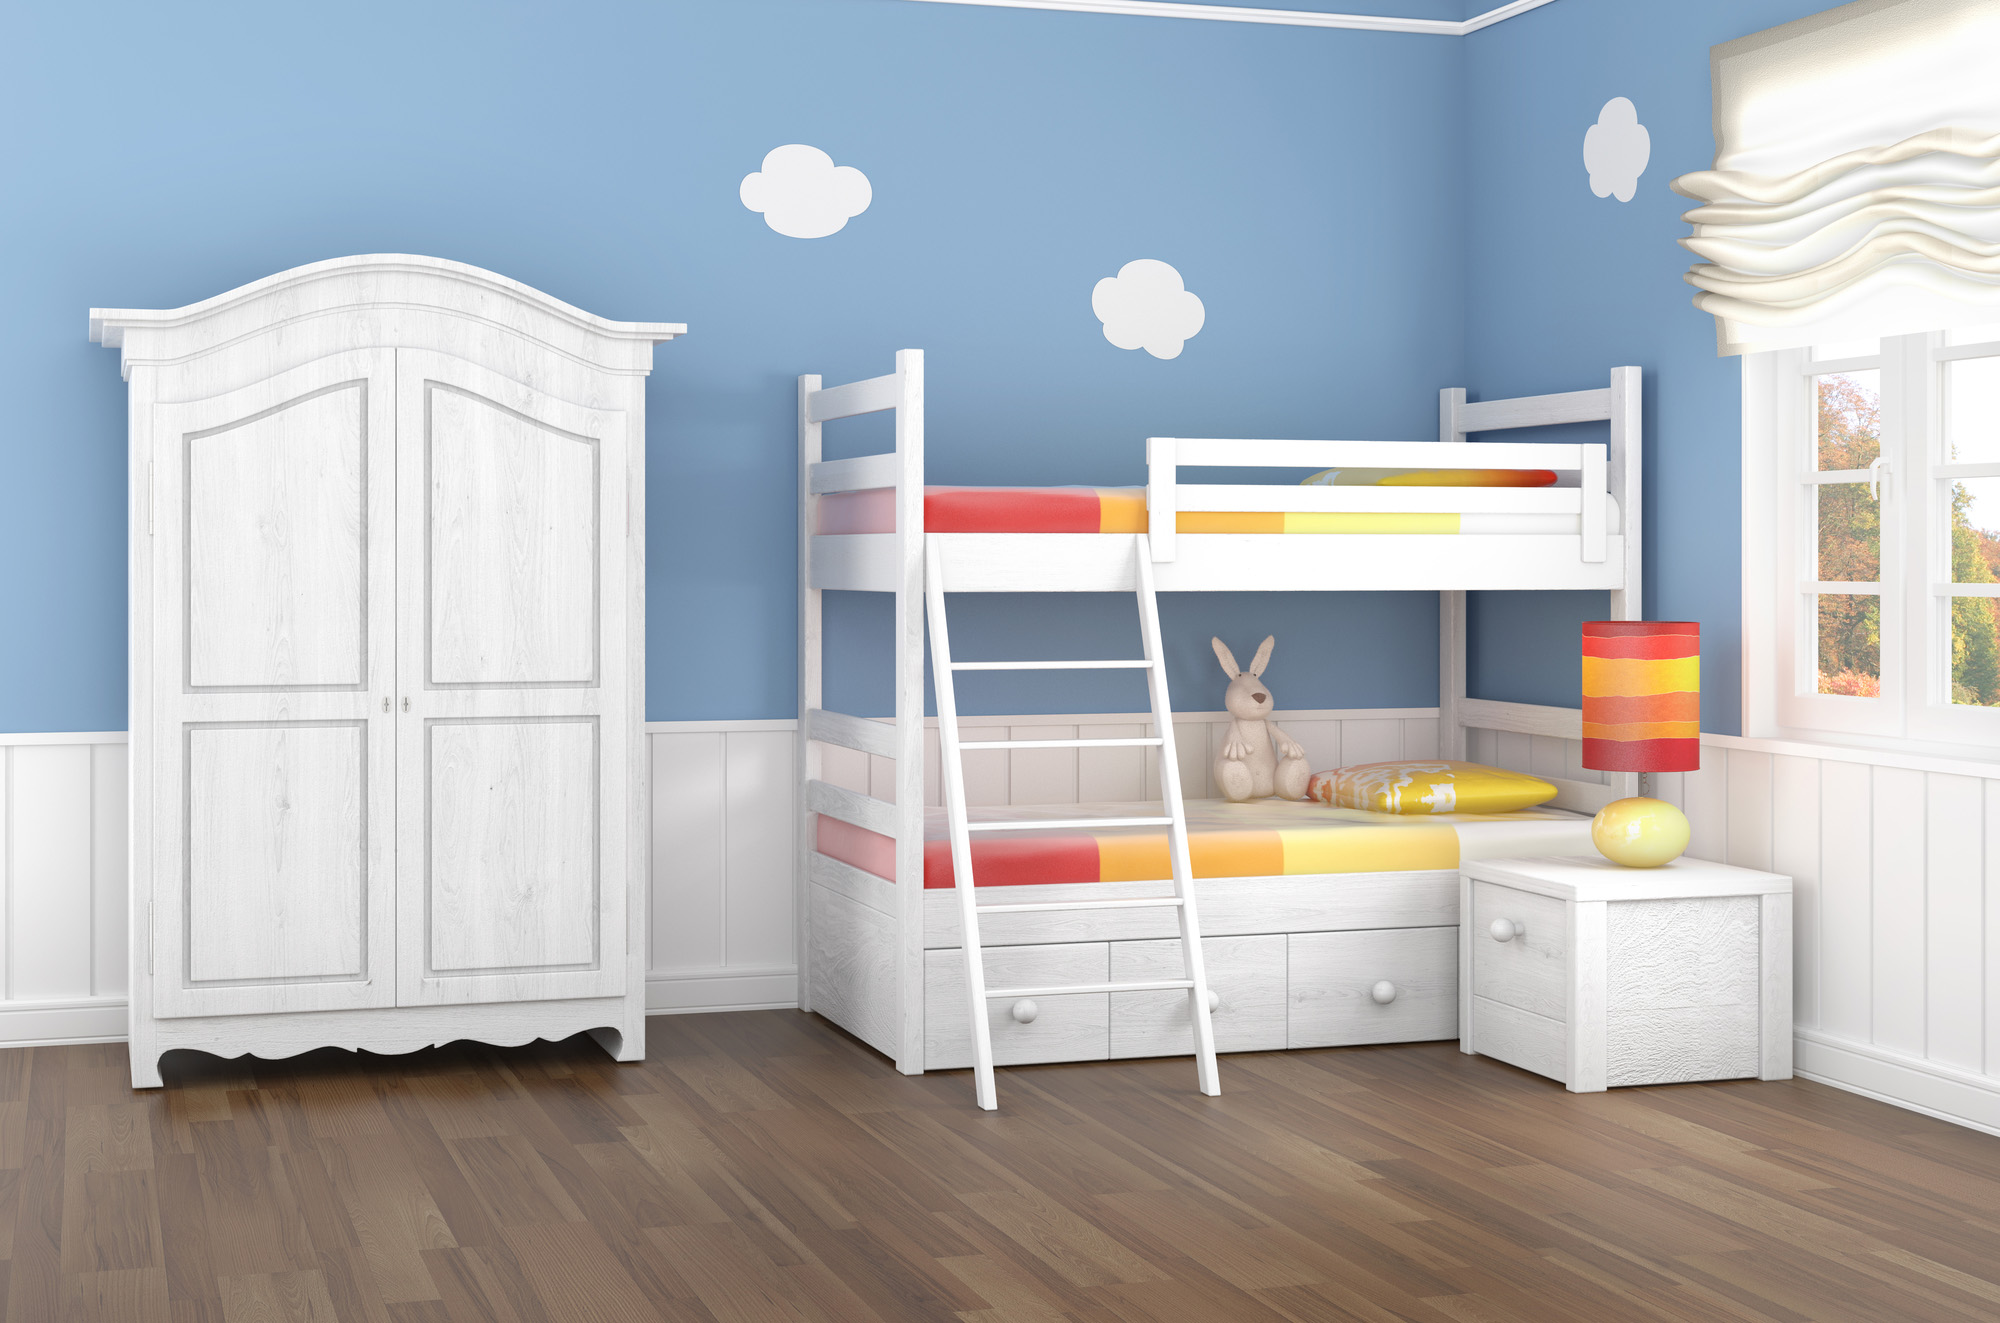 fitted wardrobes for children's bedrooms